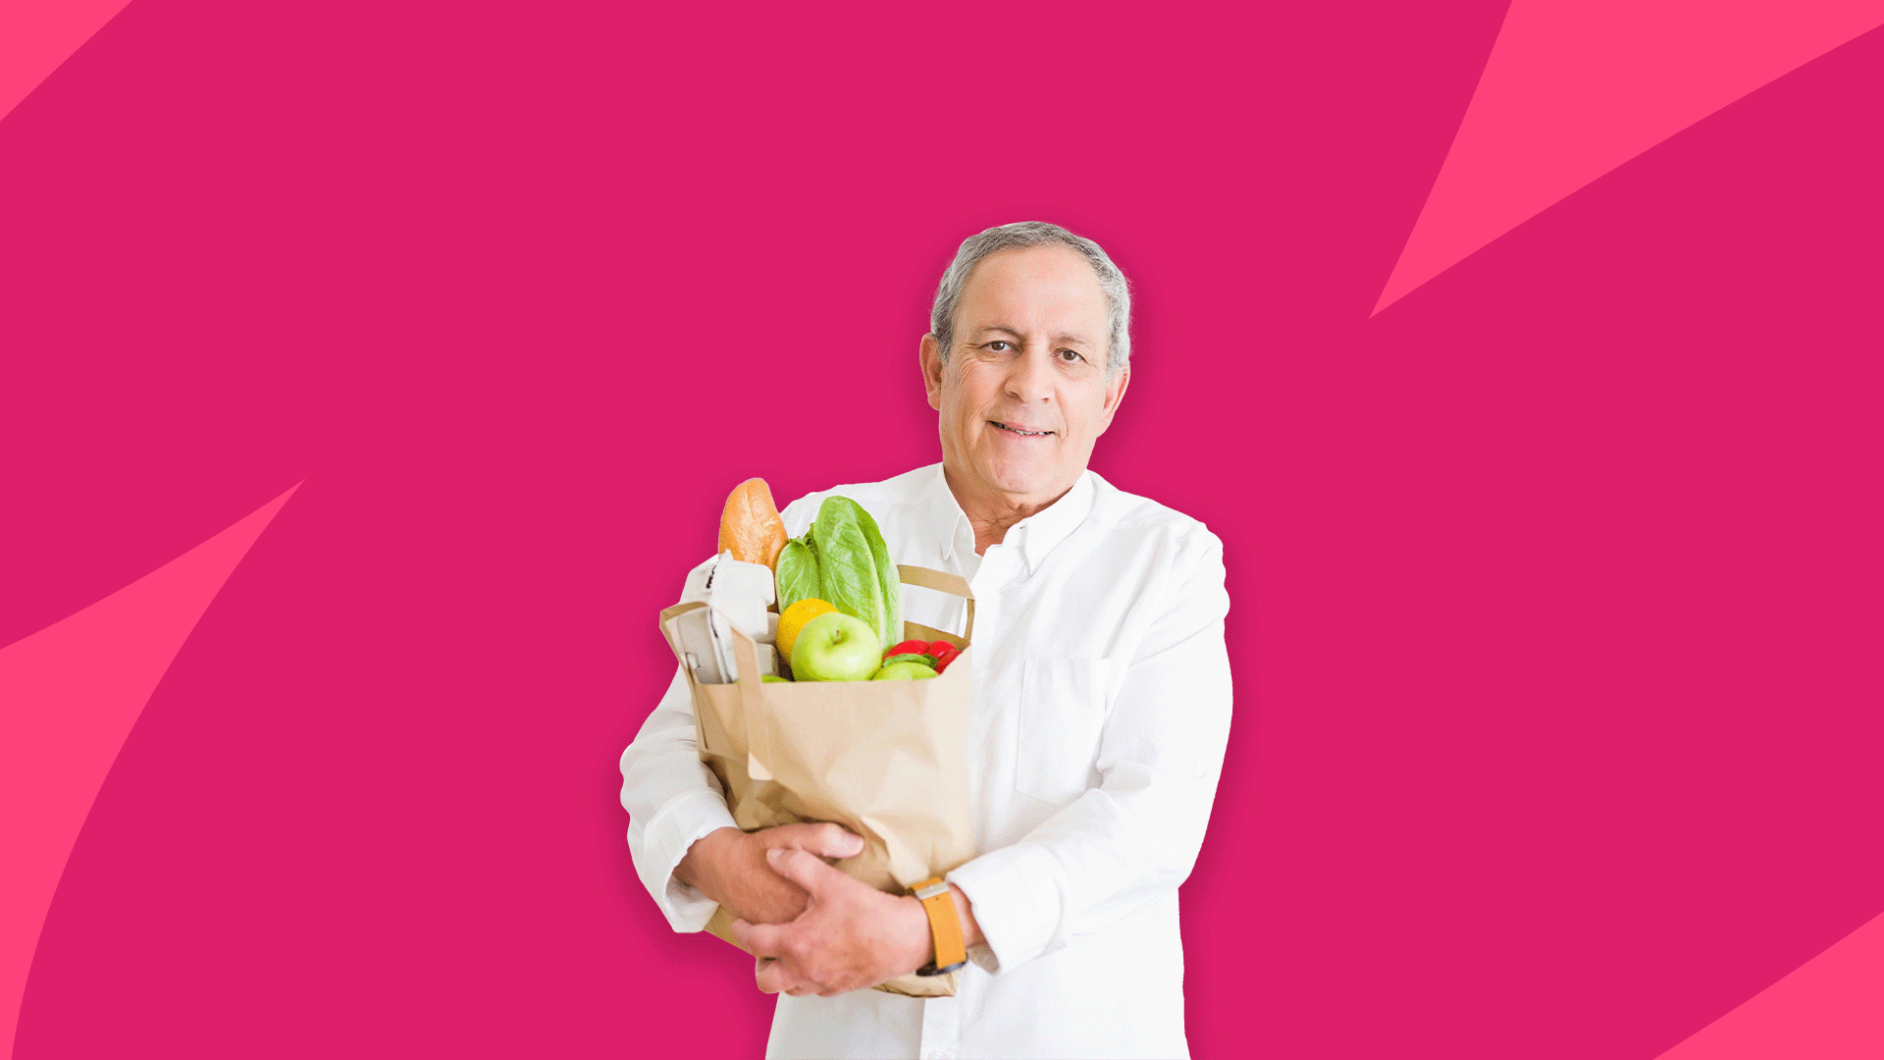 Male healthcare provider carrying a bag of groceries: Best foods to eat when nauseous